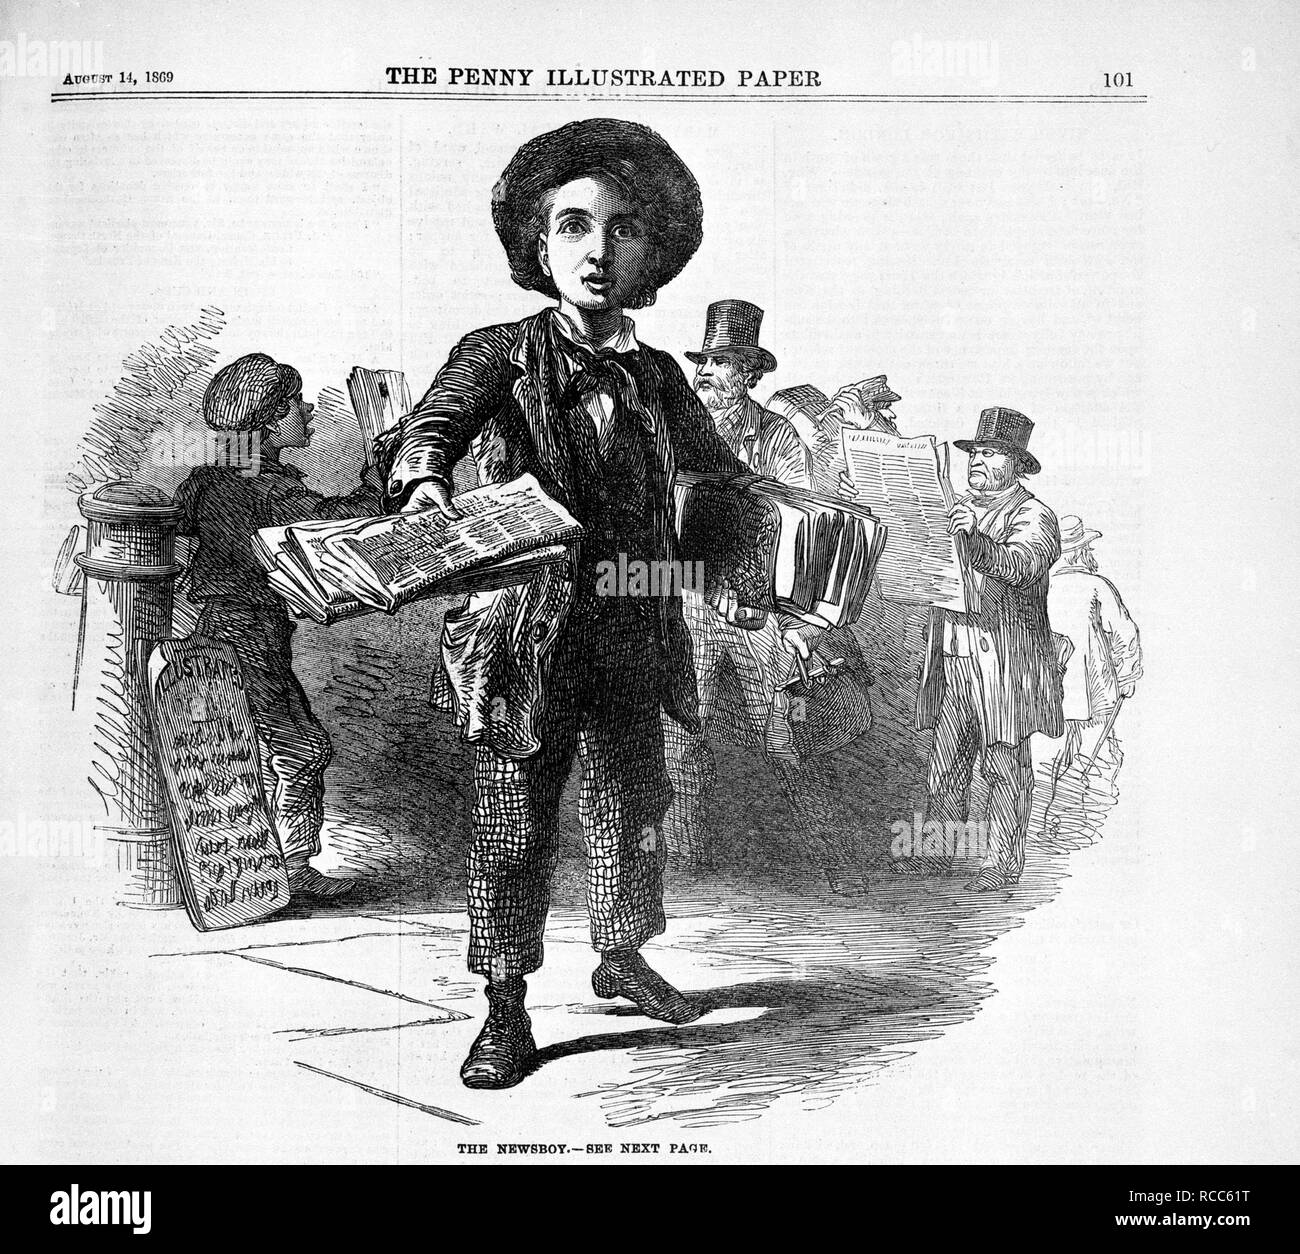 The newsboy. A boy selling newspapers. Illustration from issue dated 14 August, 1869. The Penny Illustrated Paper. London; 12 Oct.1861-28 Dec.1907. Source: Colindale,. Language: English. Stock Photo